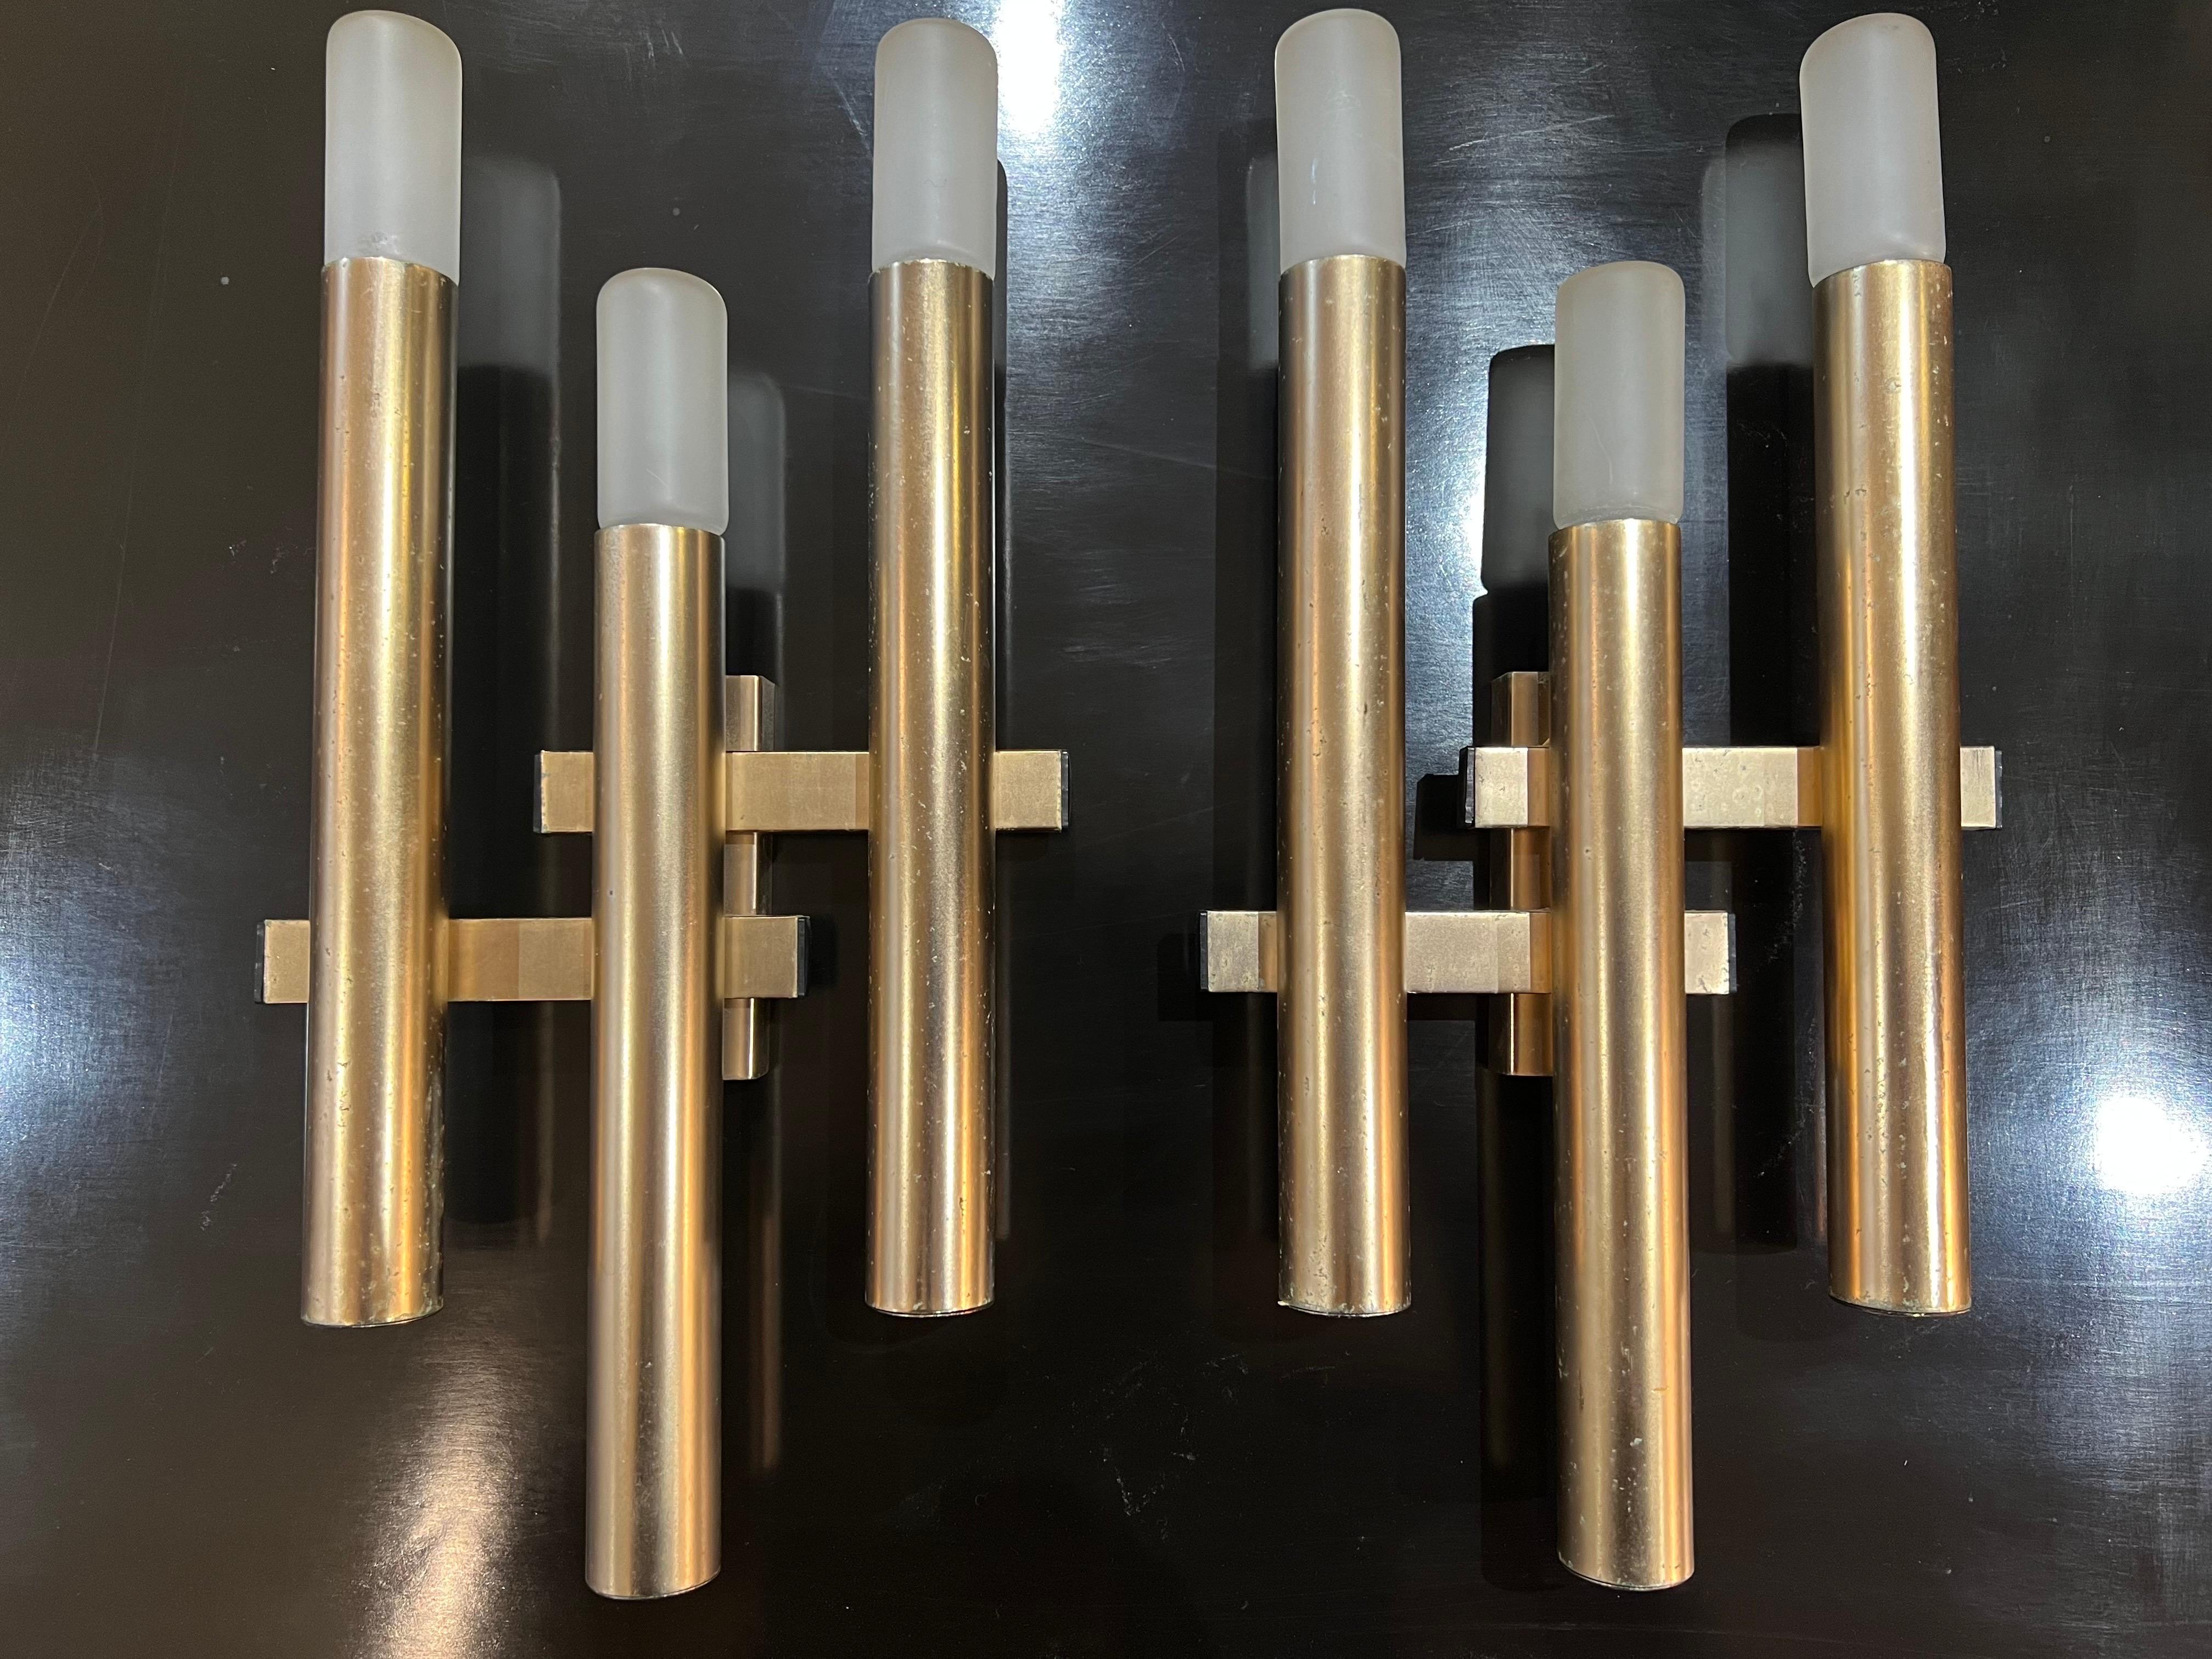 Set of 4 Stilnovo wall sconces in tubular brass with 3 bulbs each . We have an additional pair of two tubes which can be added to the set . (Please see photo and other listing)
This is an ideal collection of wall lamps that can be put together as a